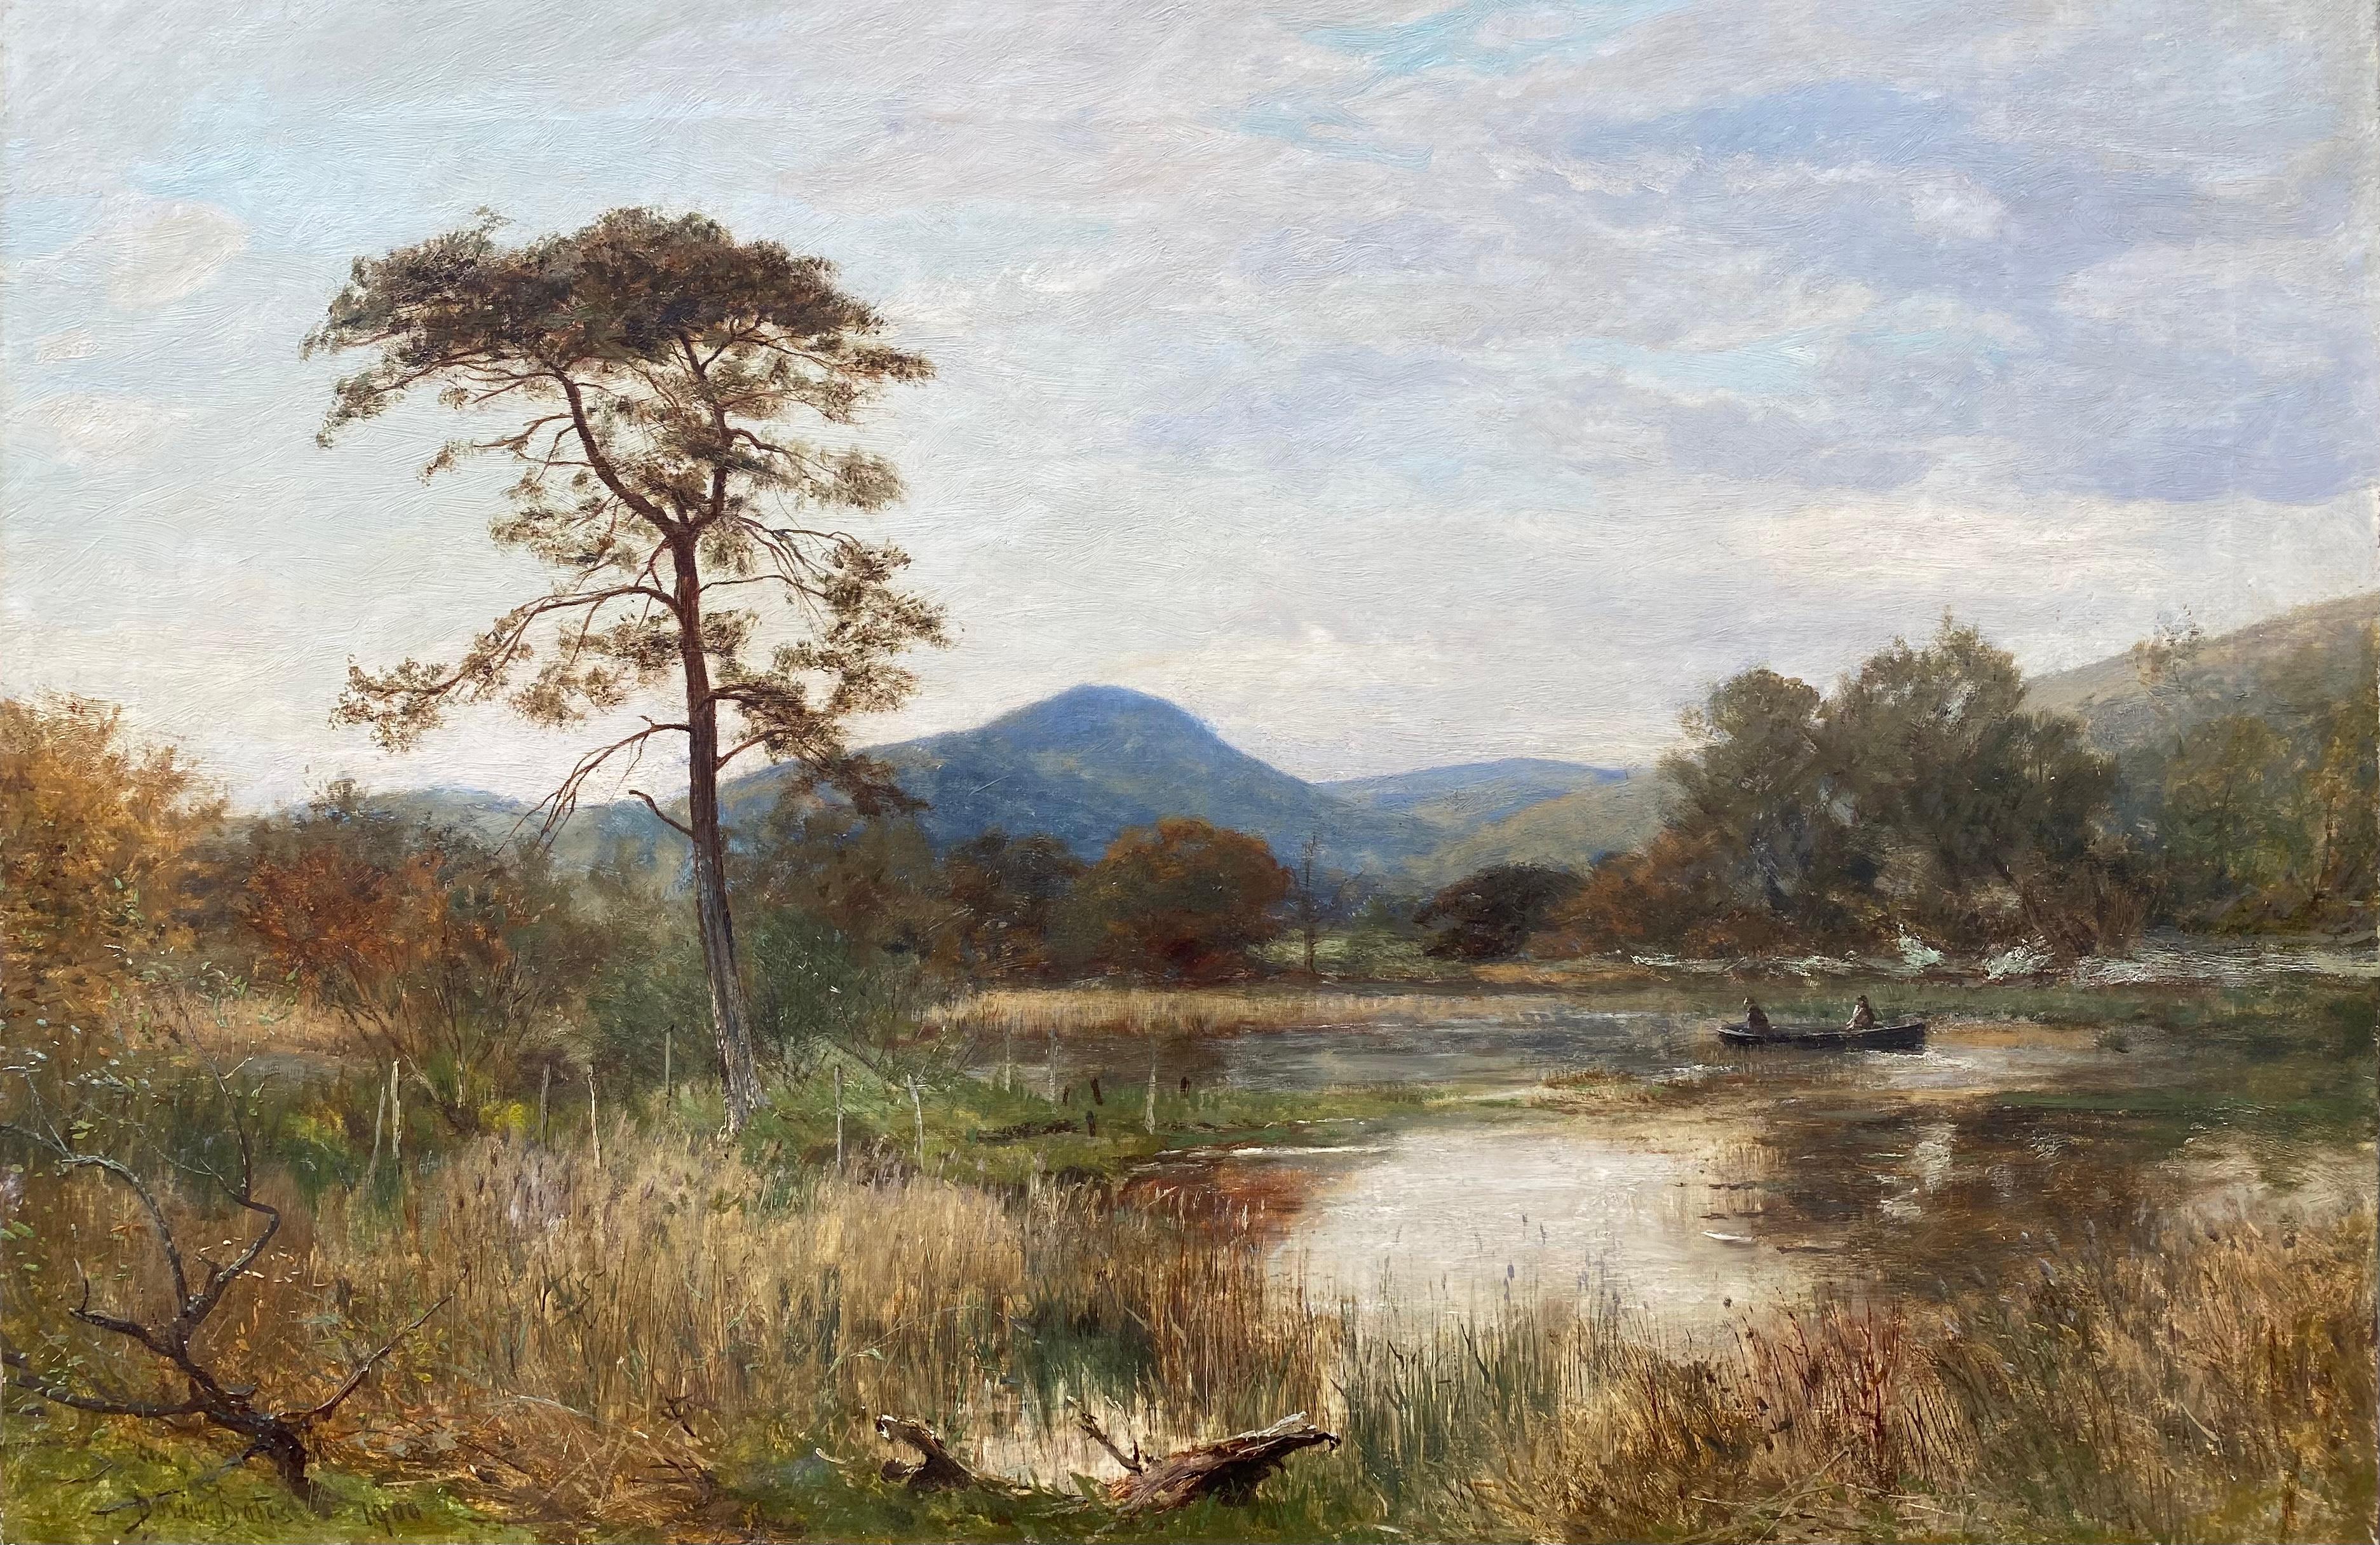 David Bates b.1840 Landscape Painting - “A Corner of Lowes Water”